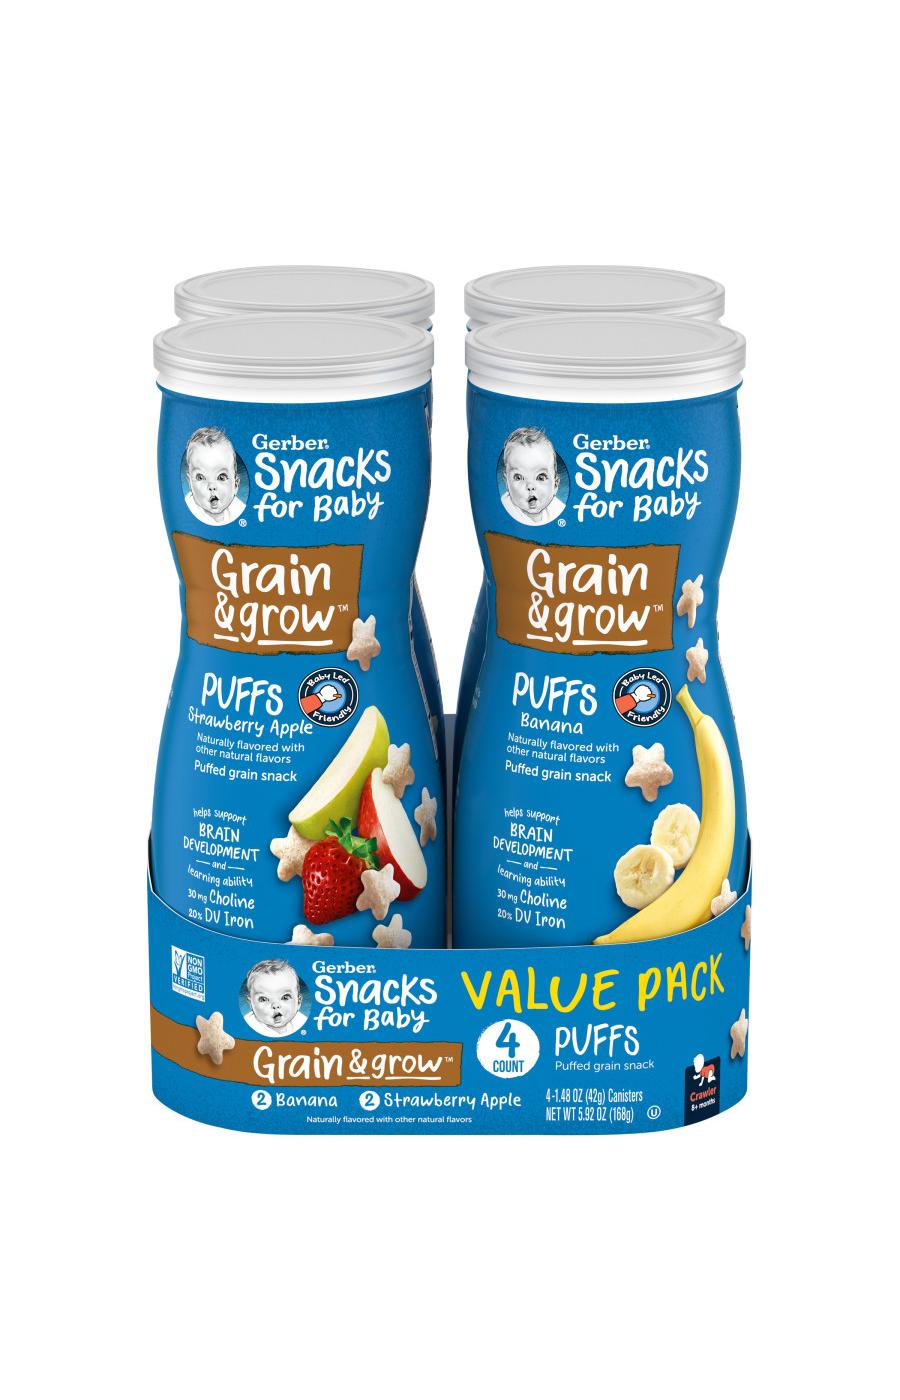 Gerber Snacks for Baby Grain & Grow Puffs Variety Pack - Banana & Strawberry Apple; image 1 of 8